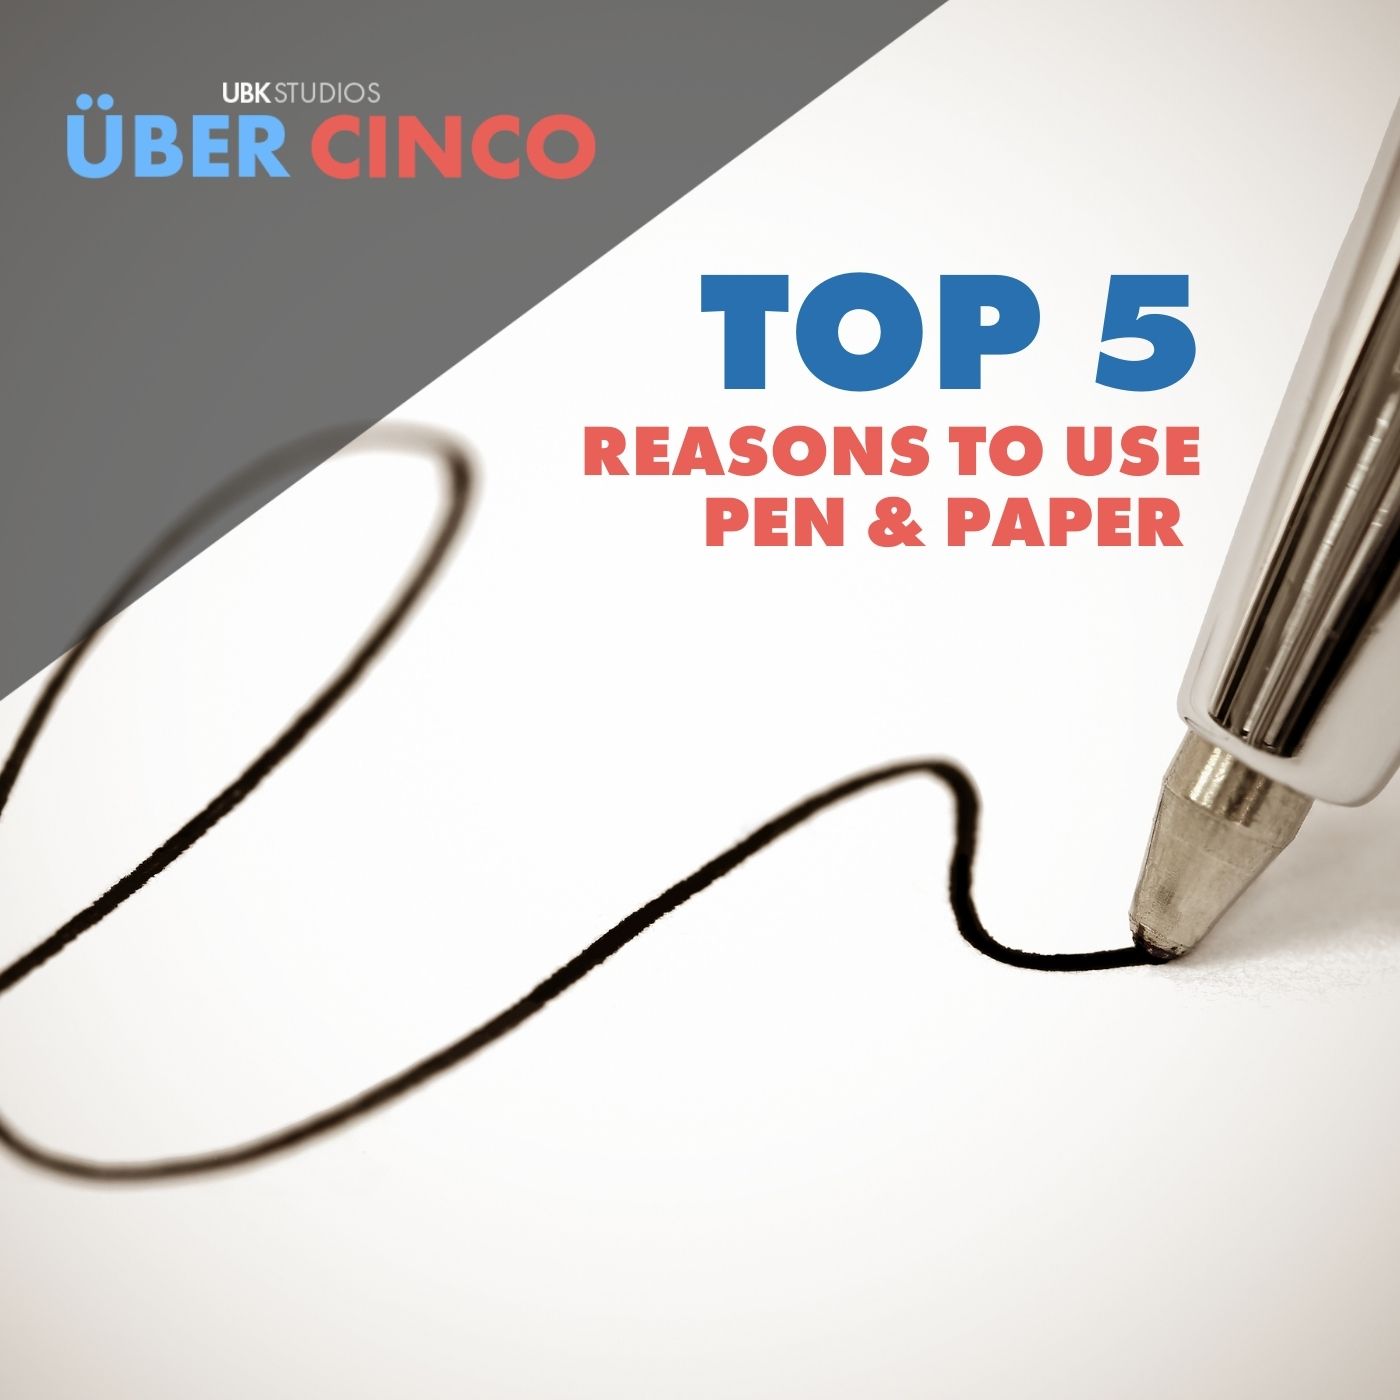 Top 5 Reasons to Use Pen & Paper Image